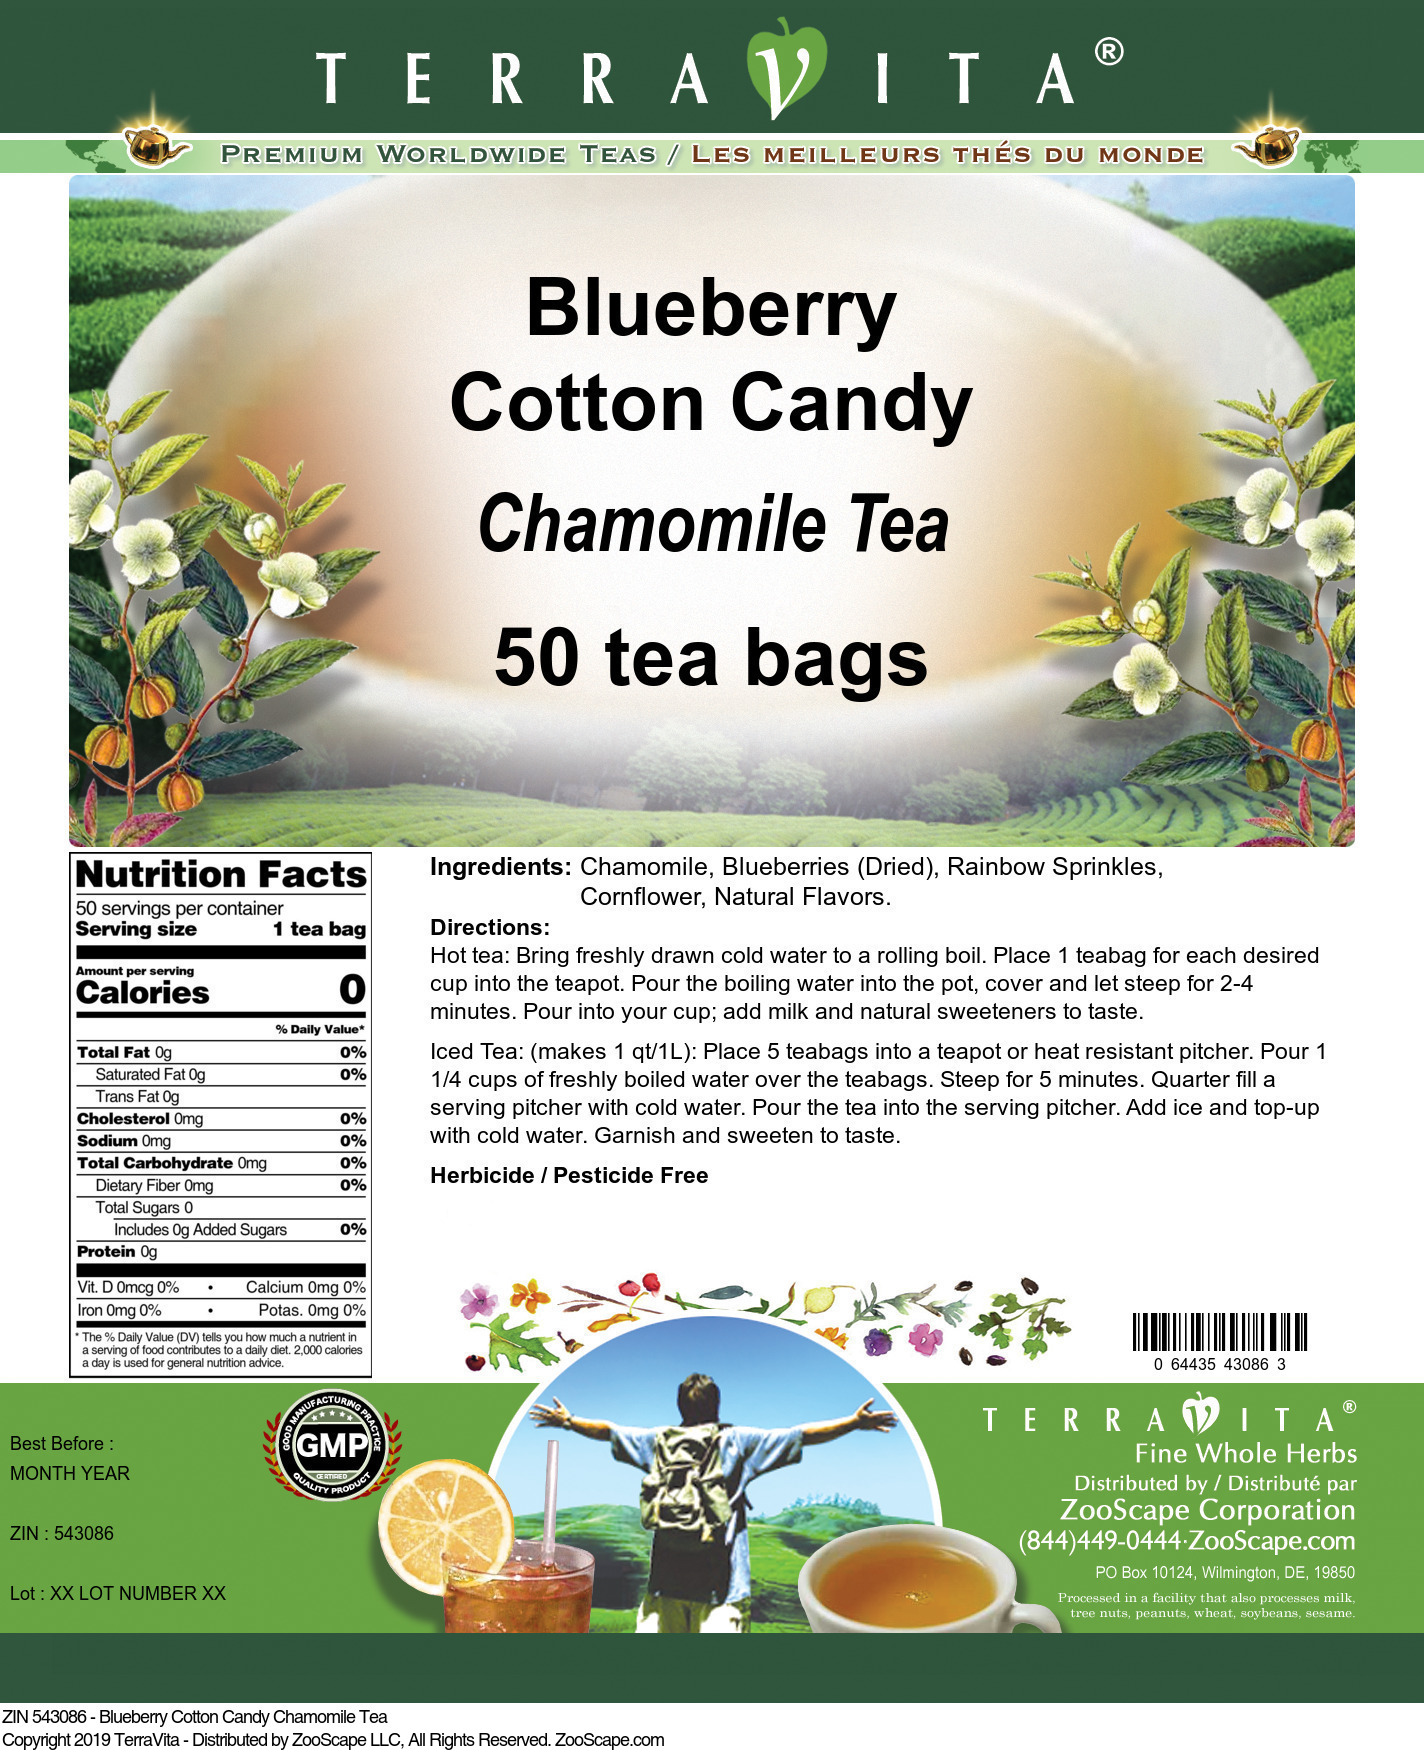 Blueberry Cotton Candy Chamomile Tea - Label